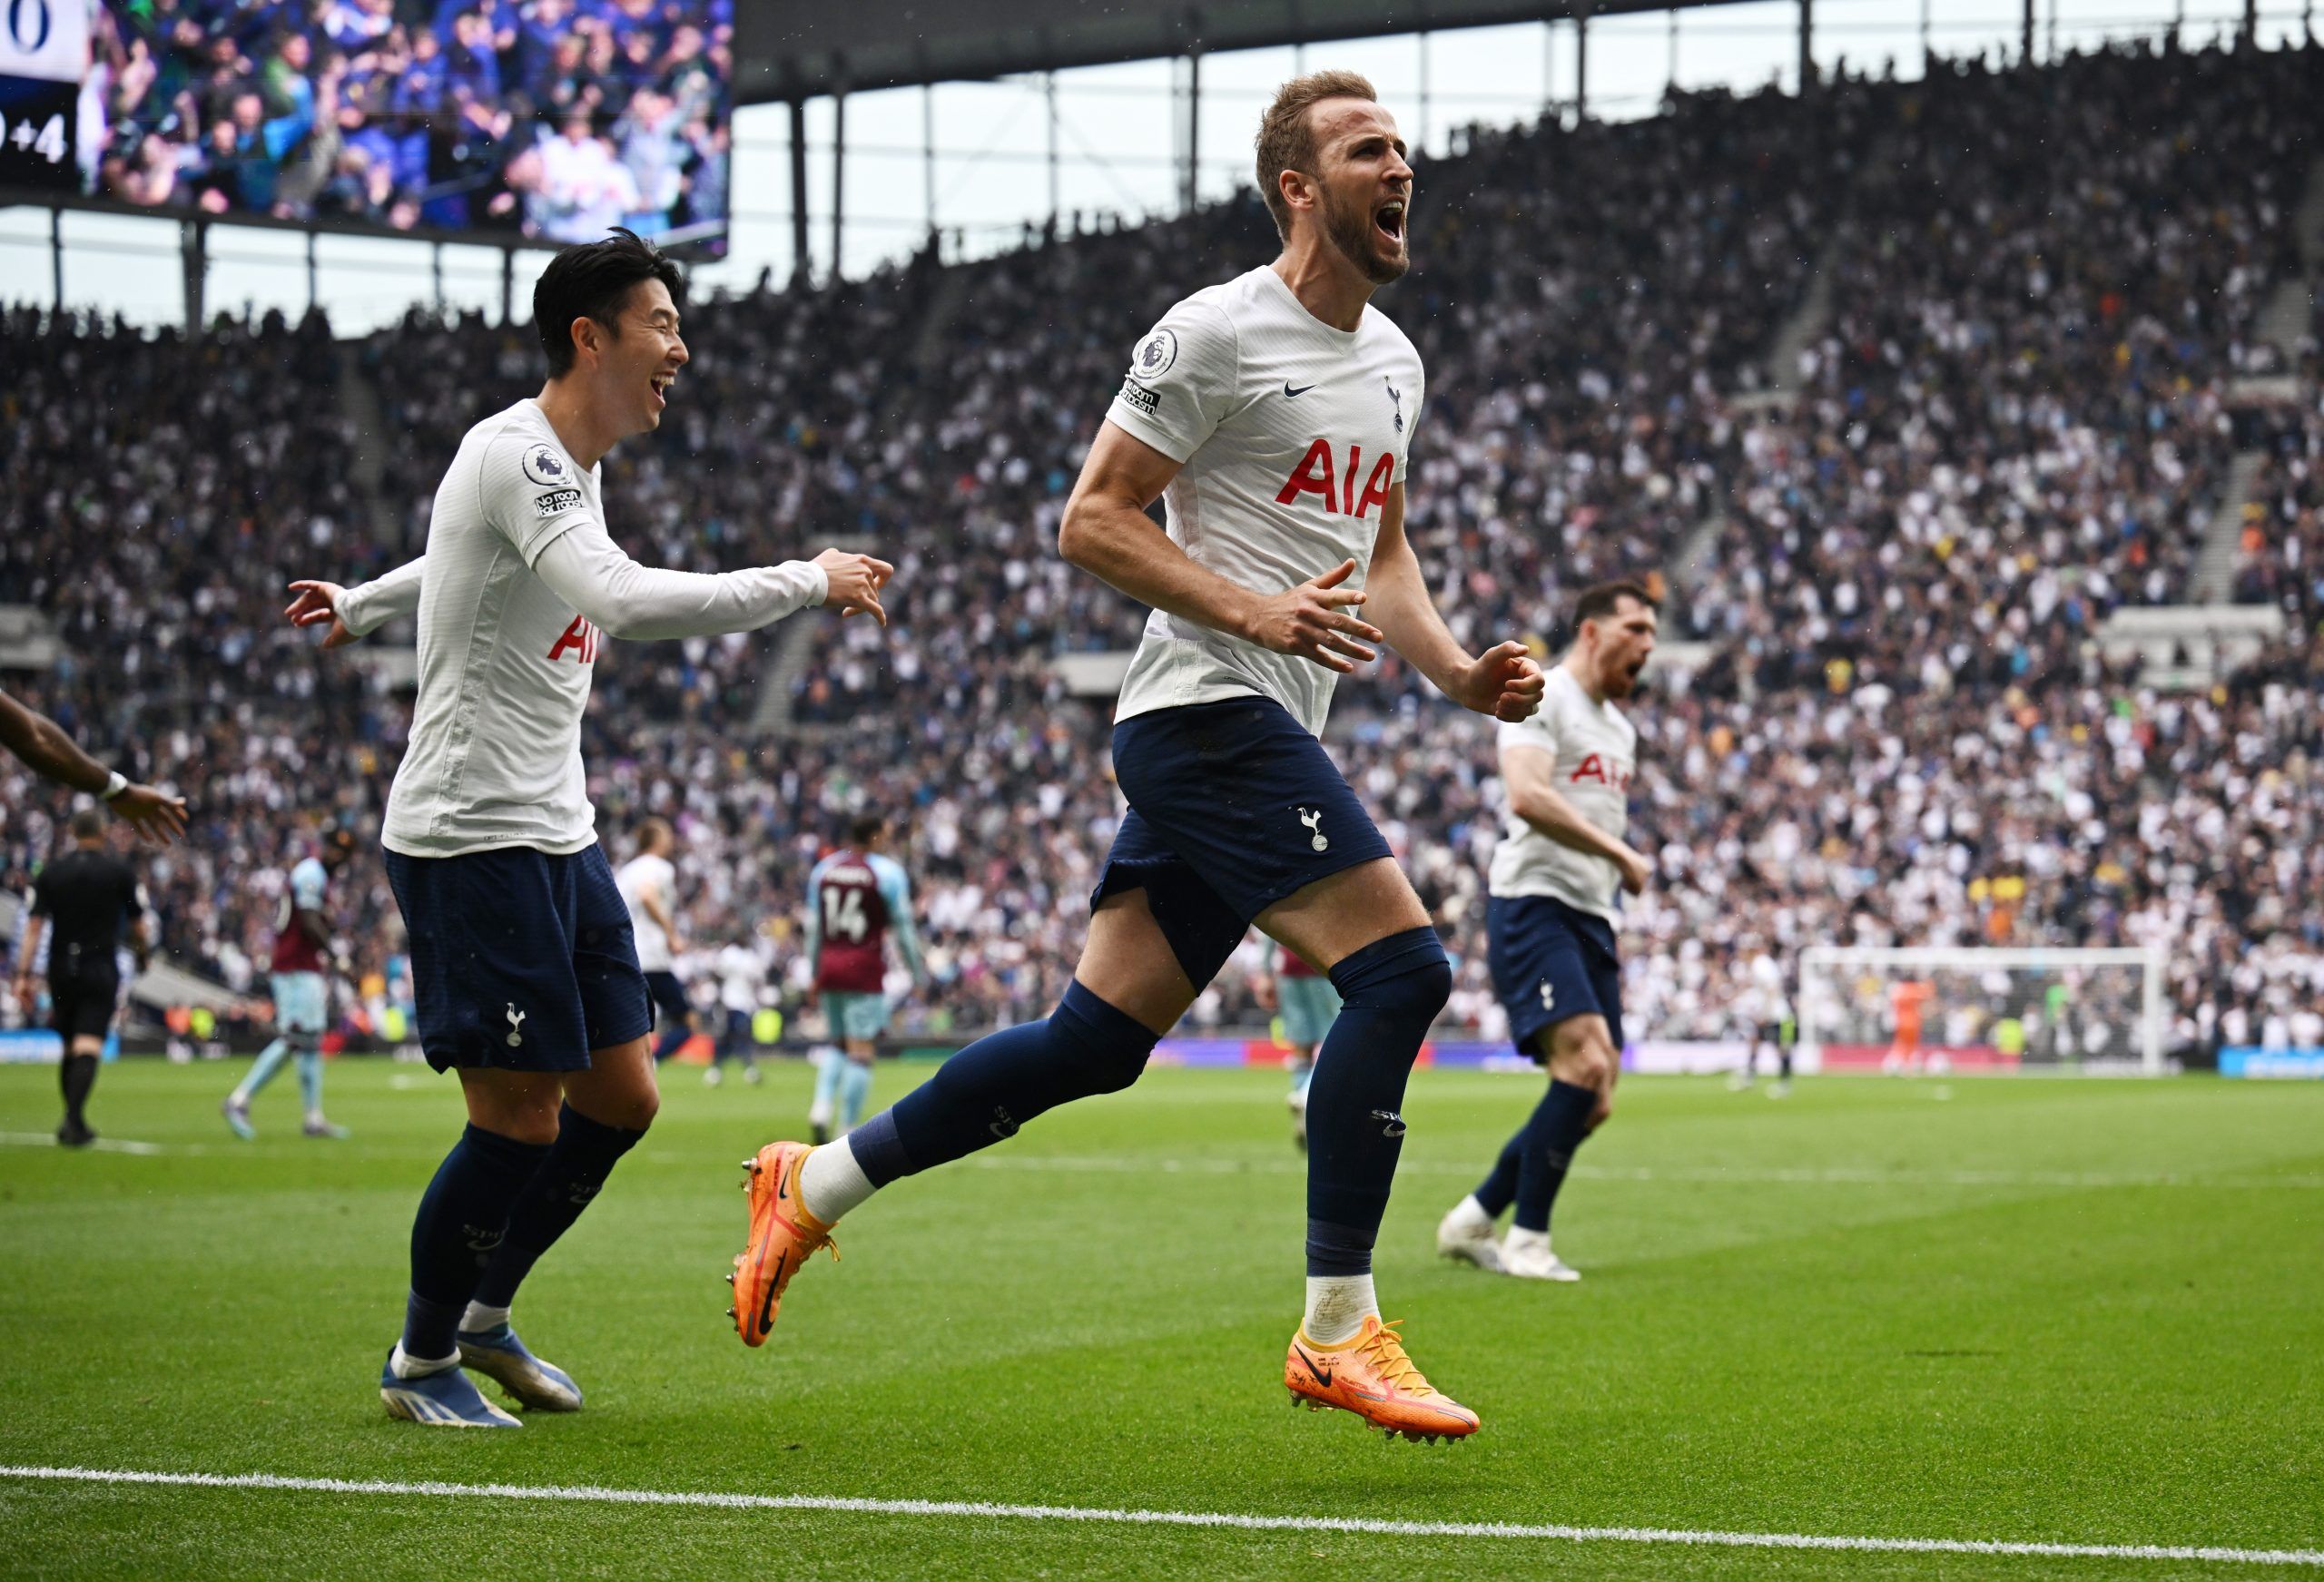 Soccer Football - Premier League - Tottenham Hotspur v Burnley - Tottenham Hotspur Stadium, London, Britain - May 15, 2022 Tottenham Hotspur's Harry Kane celebrates scoring their first goal with Son Heung-min REUTERS/Dylan Martinez EDITORIAL USE ONLY. No use with unauthorized audio, video, data, fixture lists, club/league logos or 'live' services. Online in-match use limited to 75 images, no video emulation. No use in betting, games or single club /league/player publications.  Please contact you